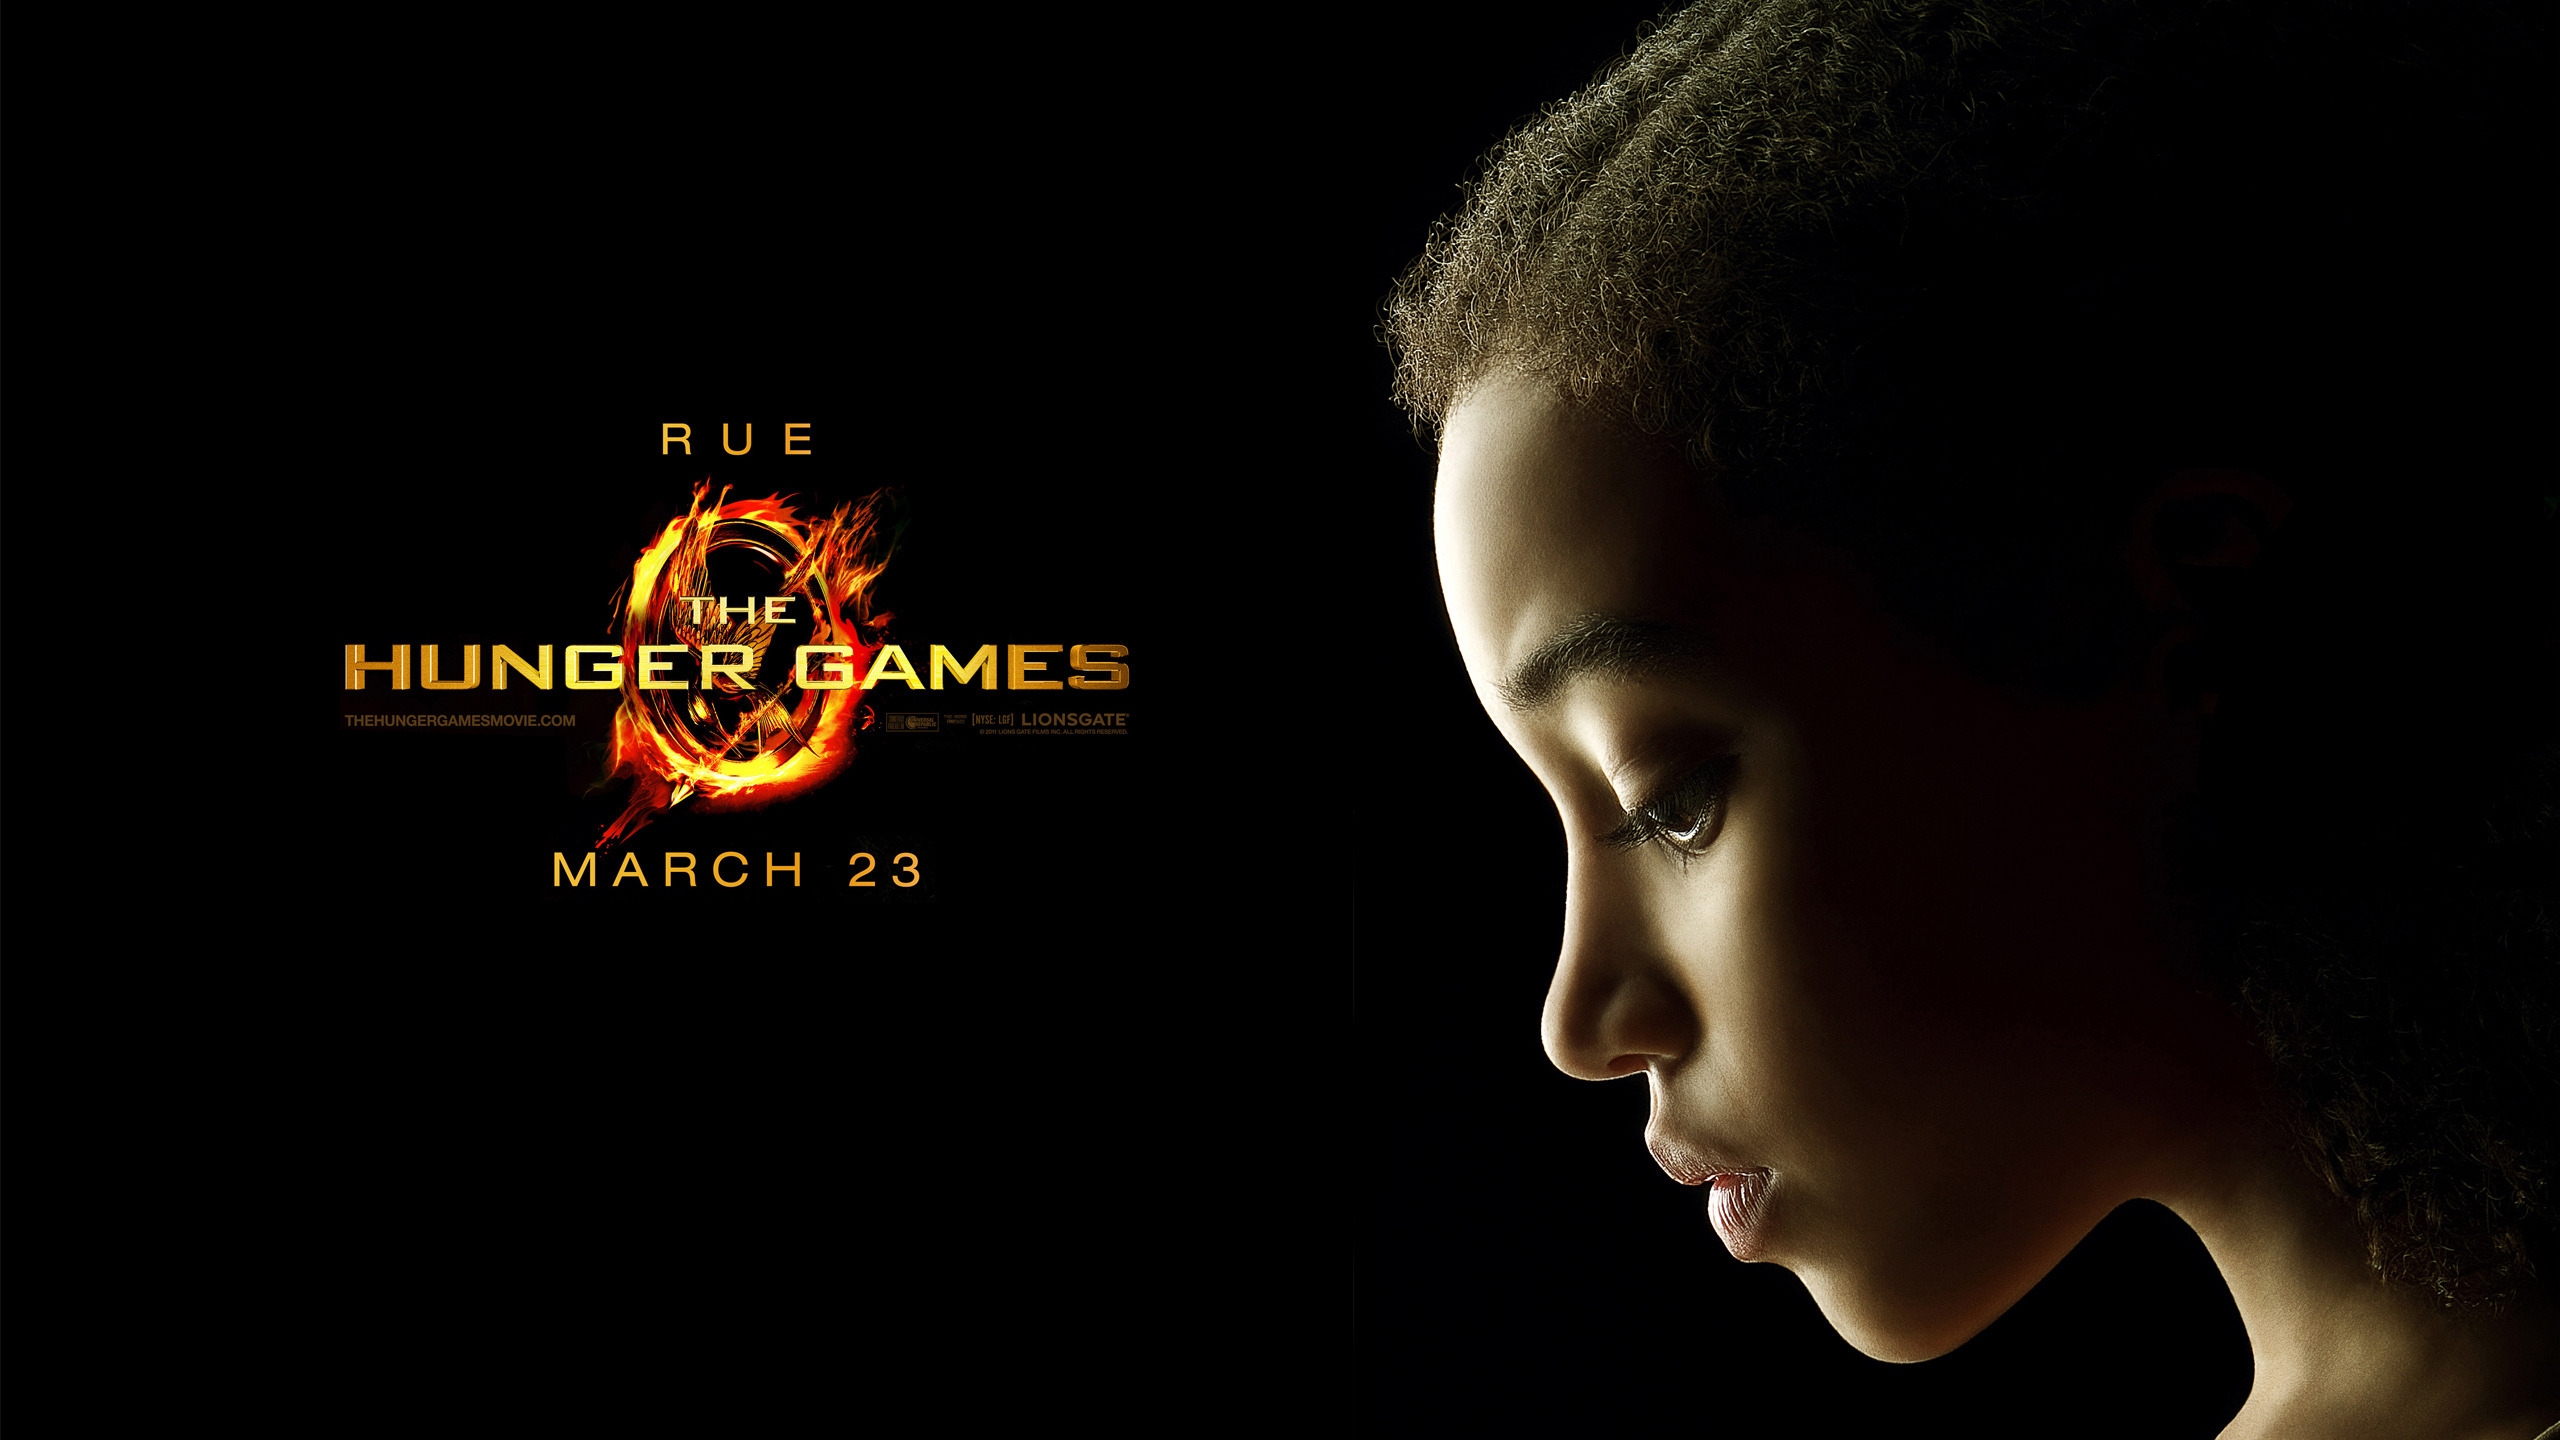 The Hunger Games Rue for 2560x1440 HDTV resolution